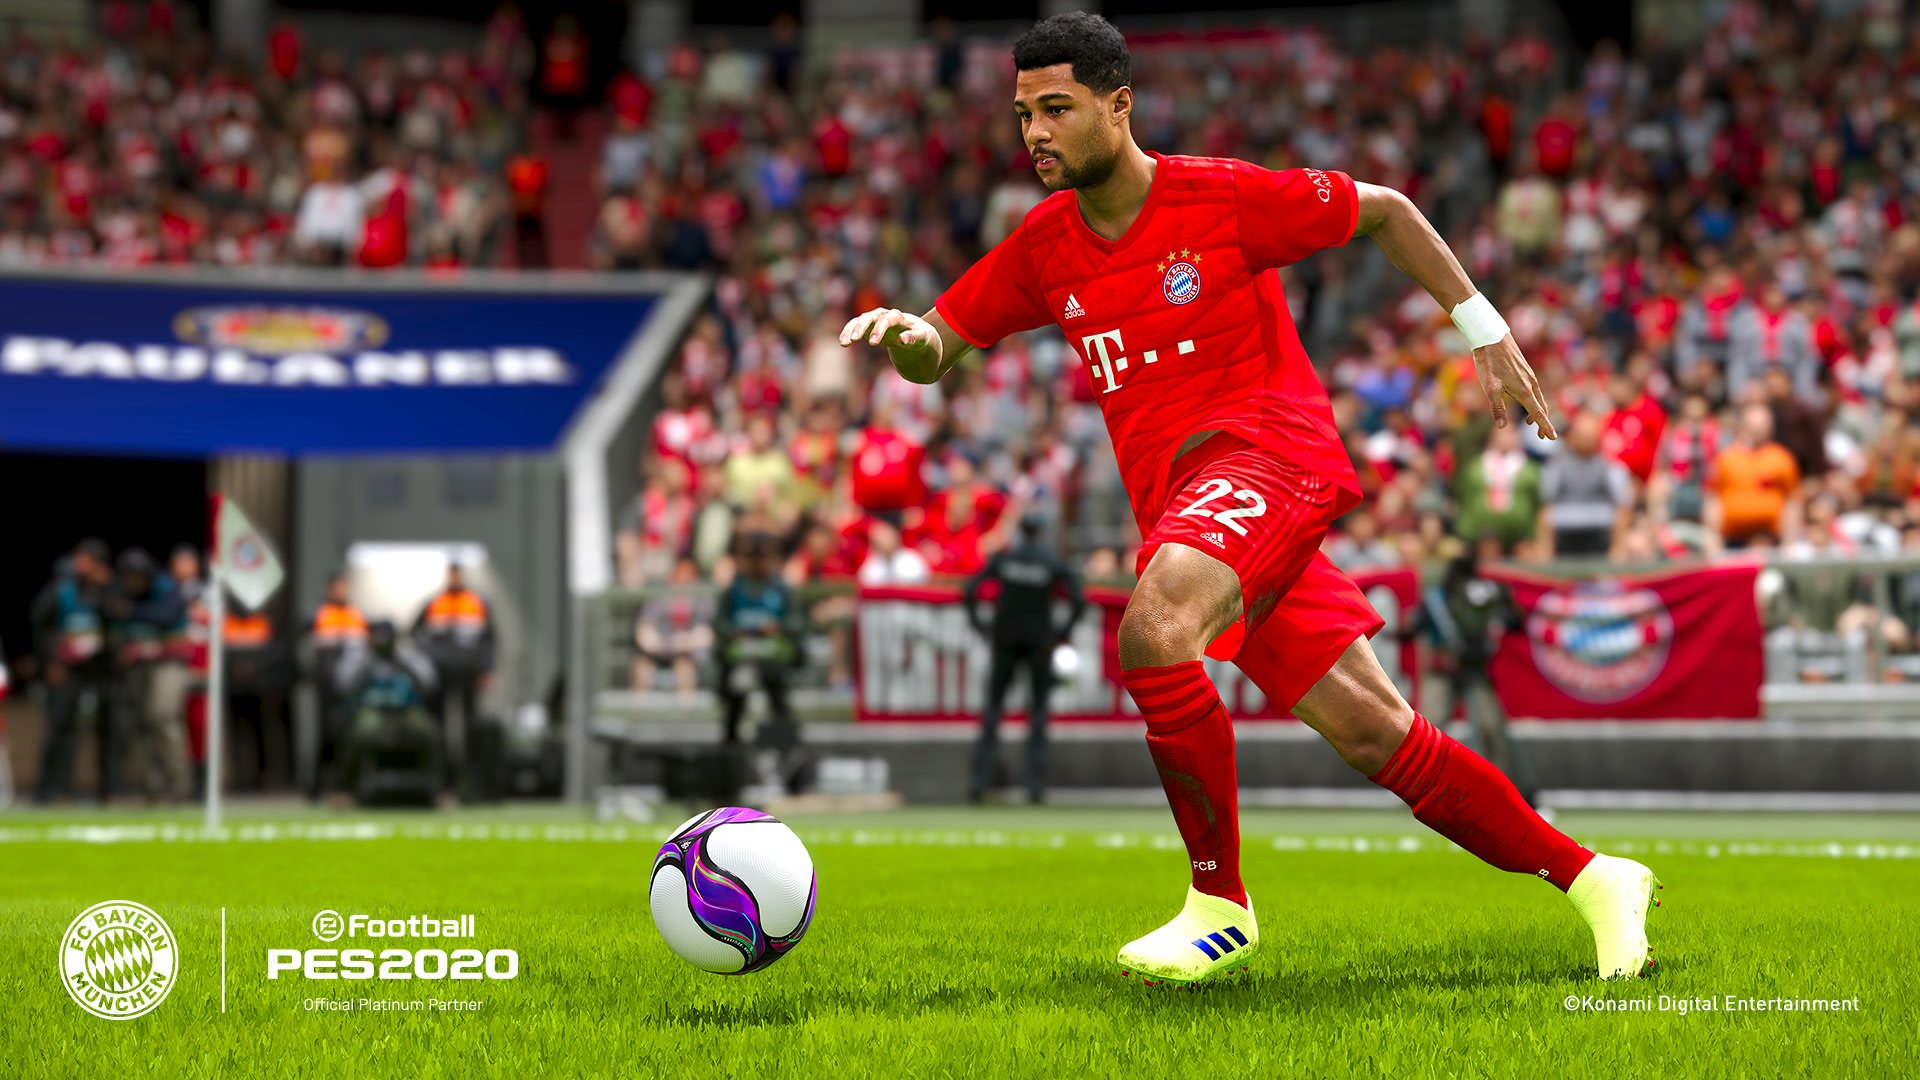 download free efootball pes 2022 mobile